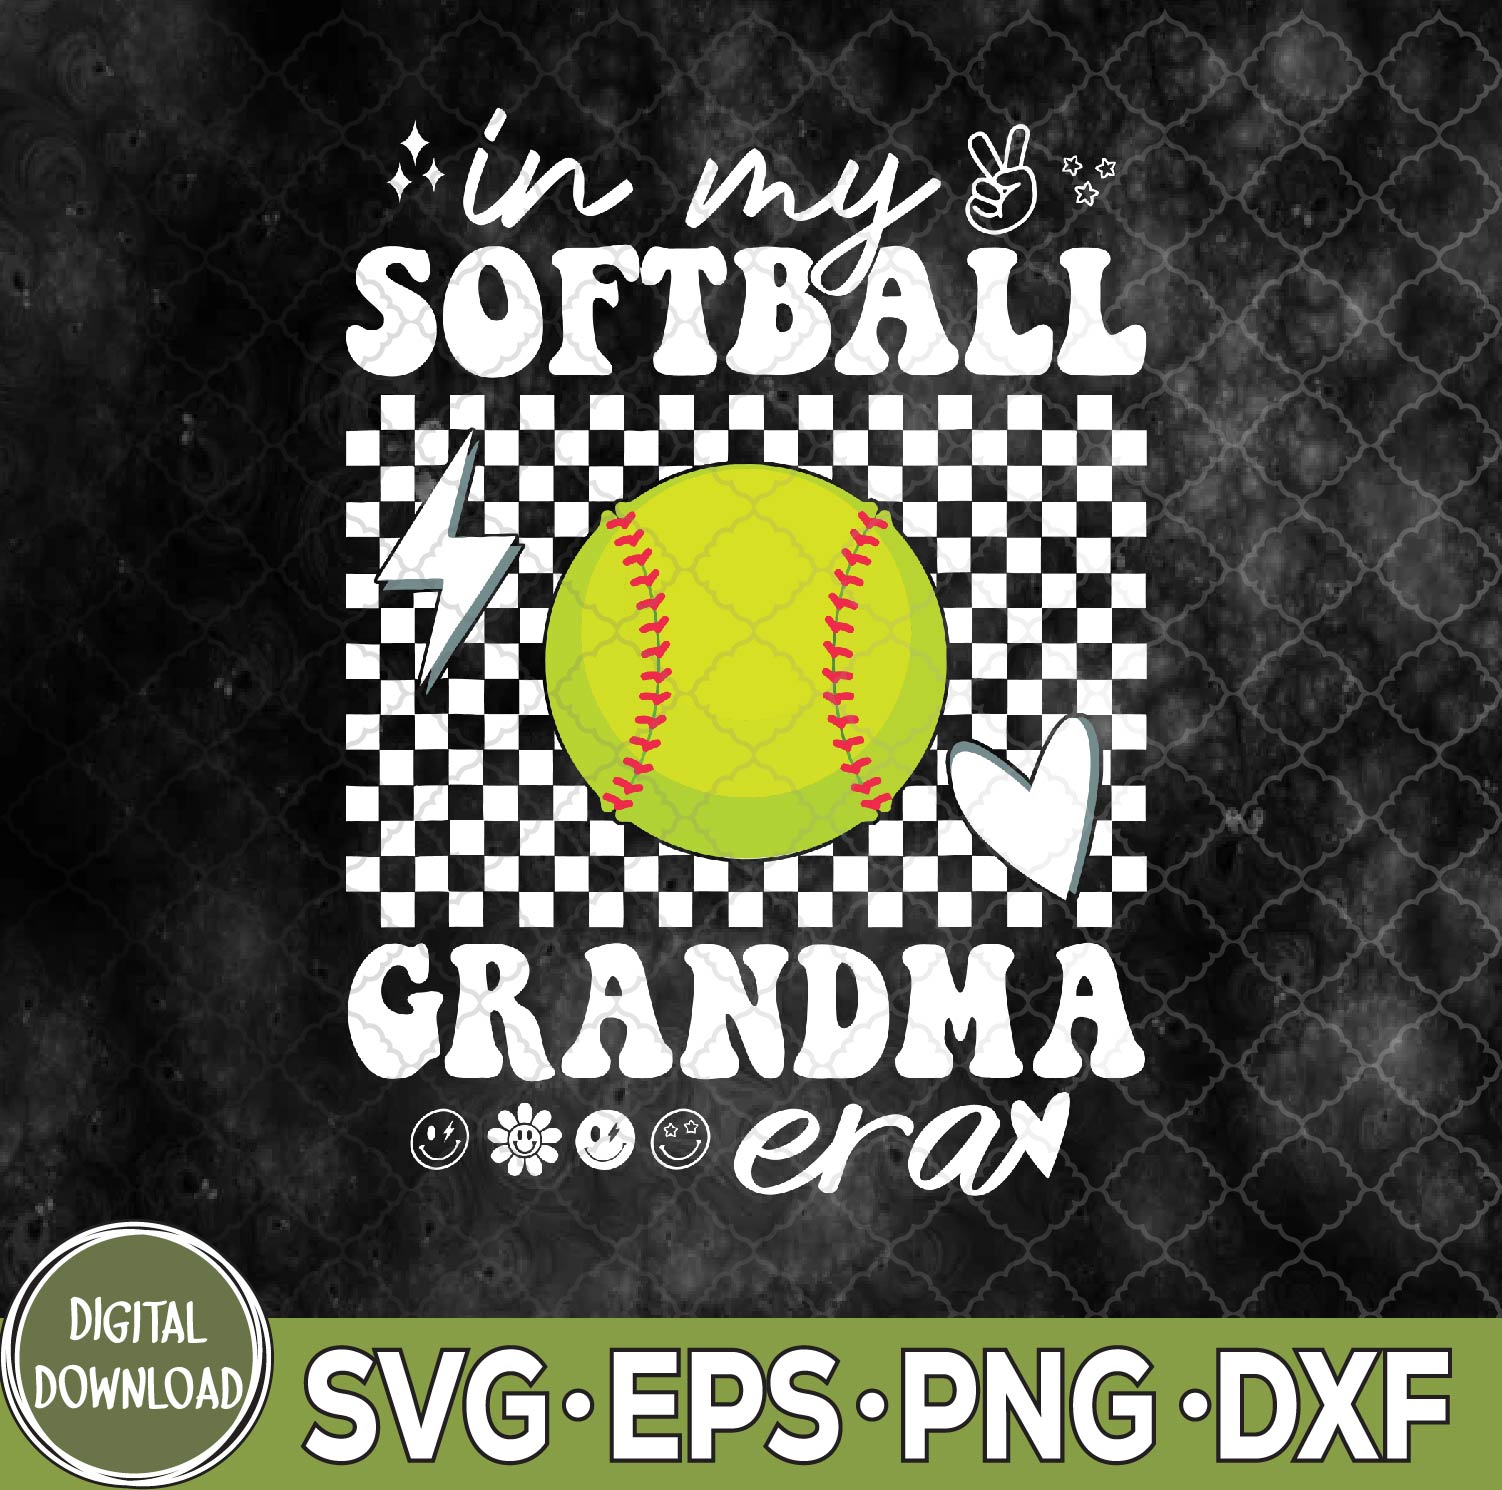 WTMNEW9file 09 155 Groovy In My Softball Grandma Era Matching Family Svg, Png, Digital Download